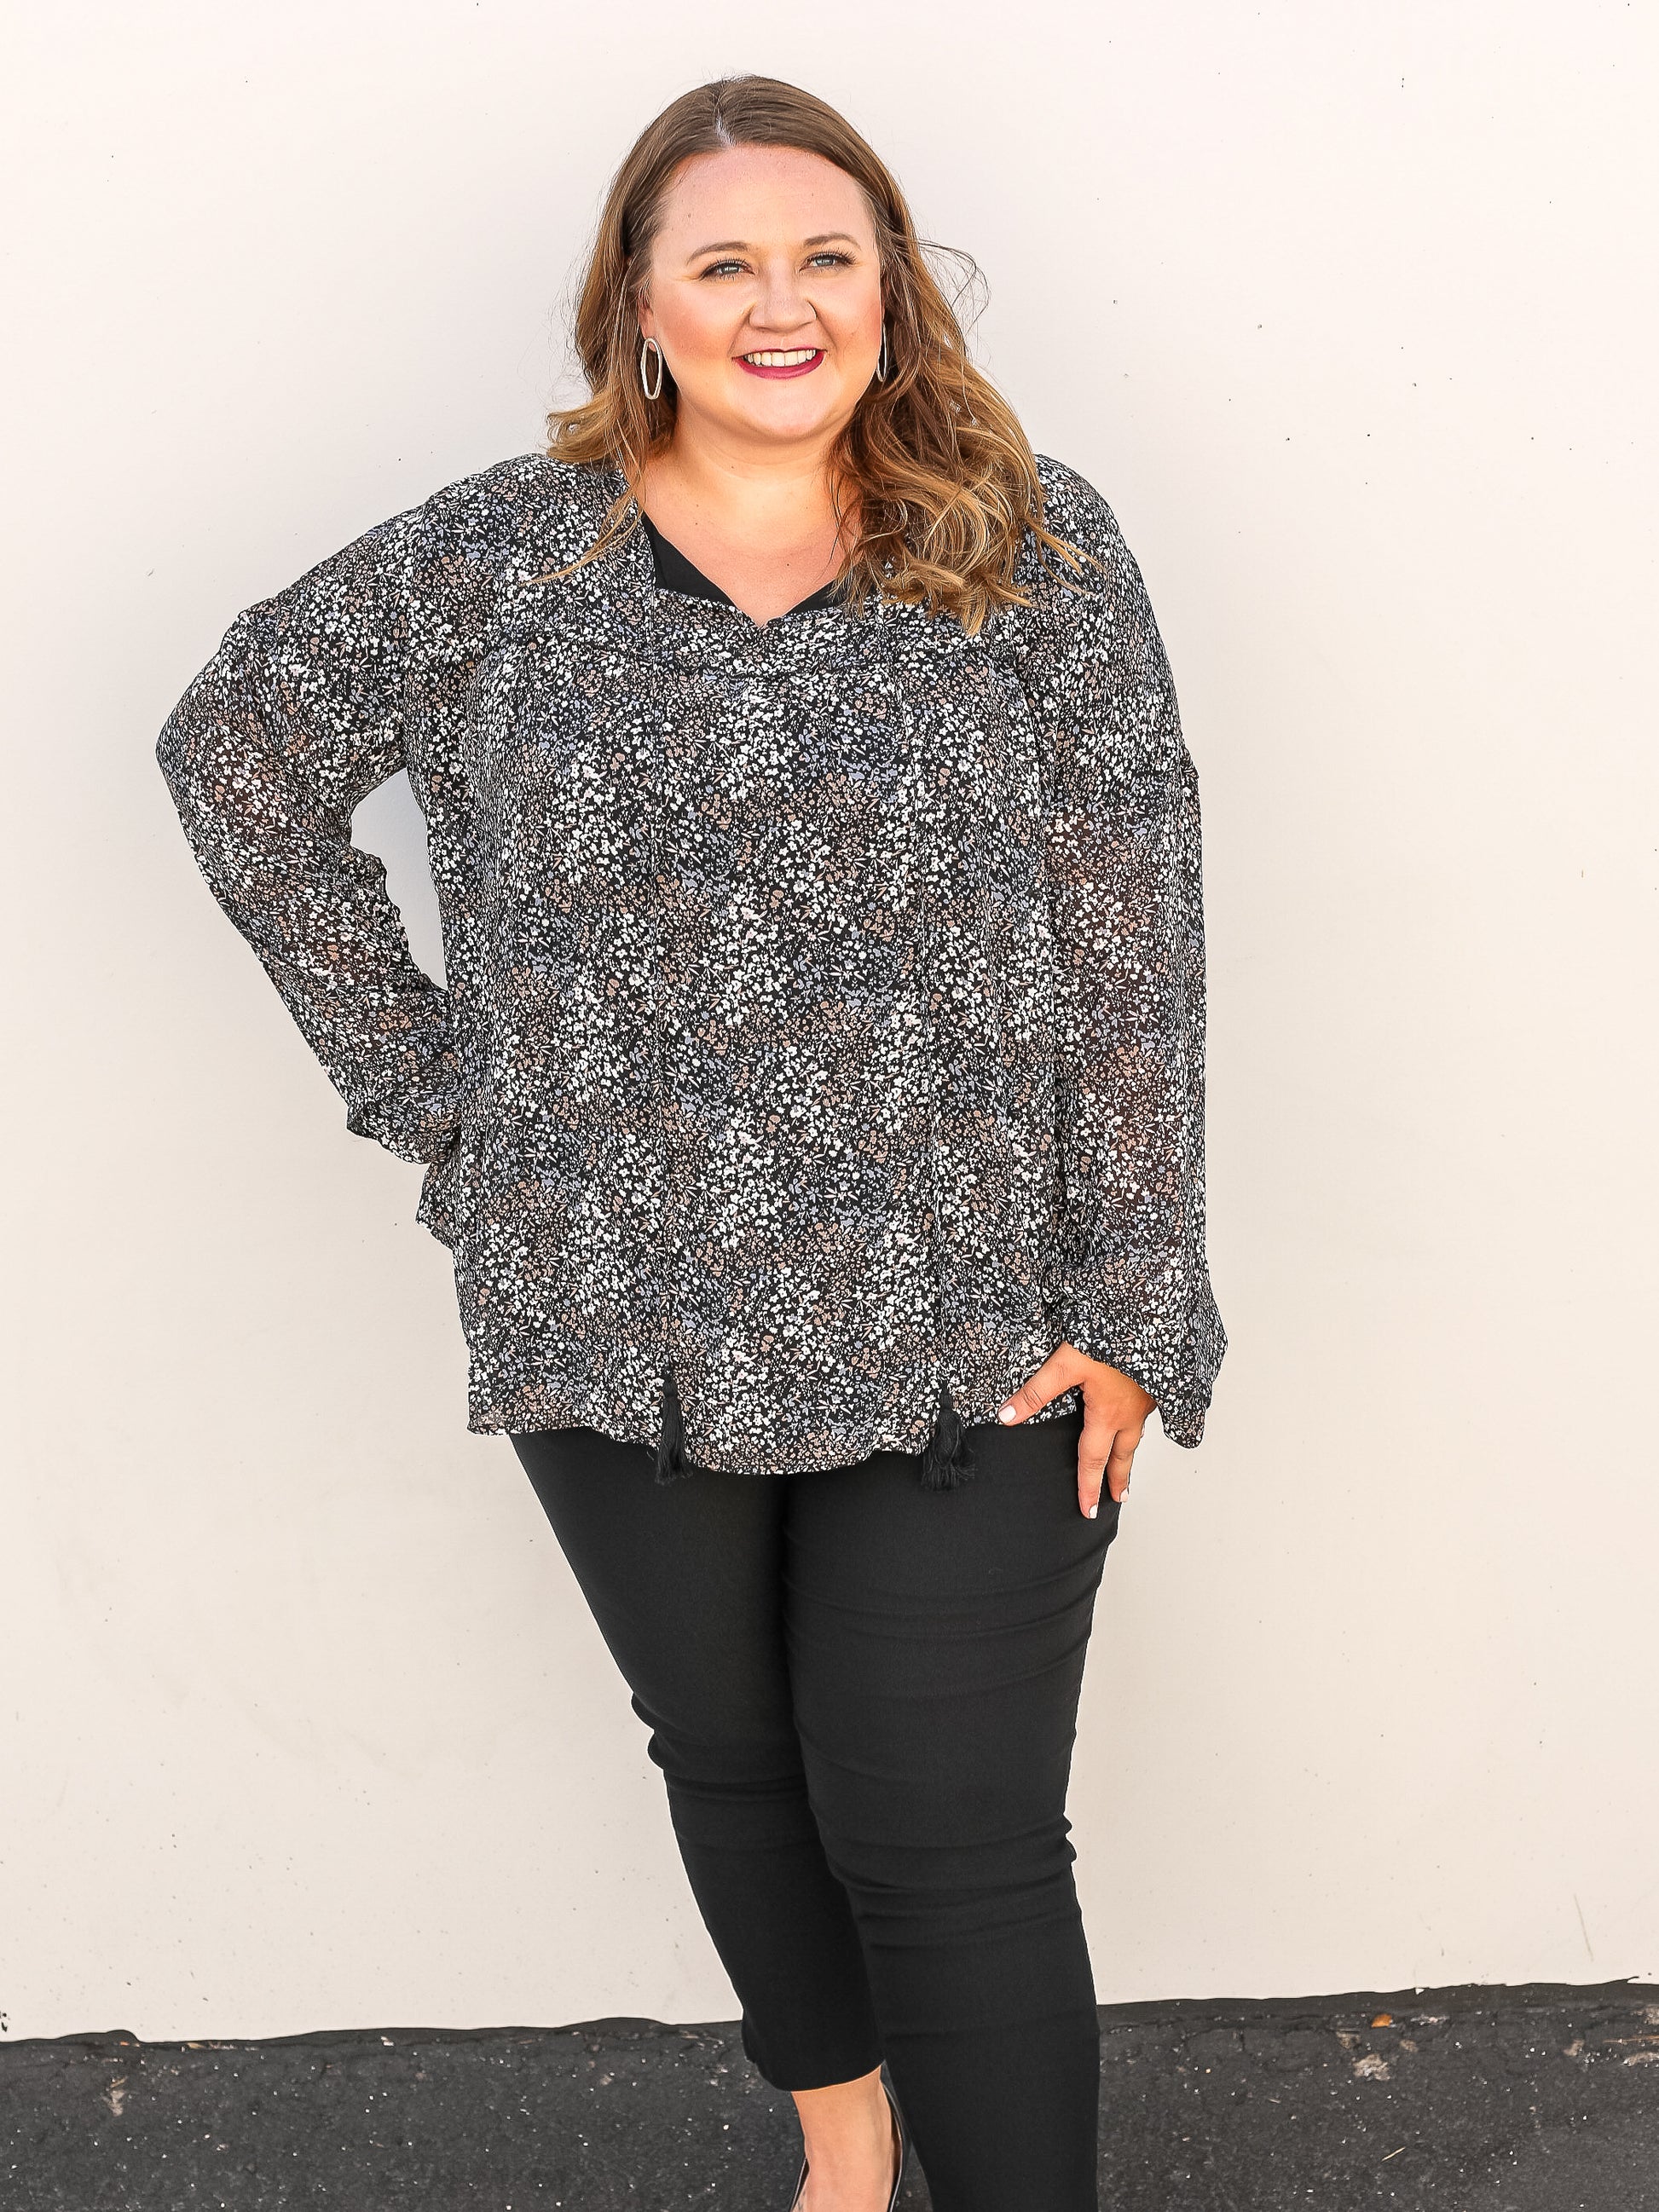 Floral blouse with mini floral patterns pairs great with black slacks and jeans